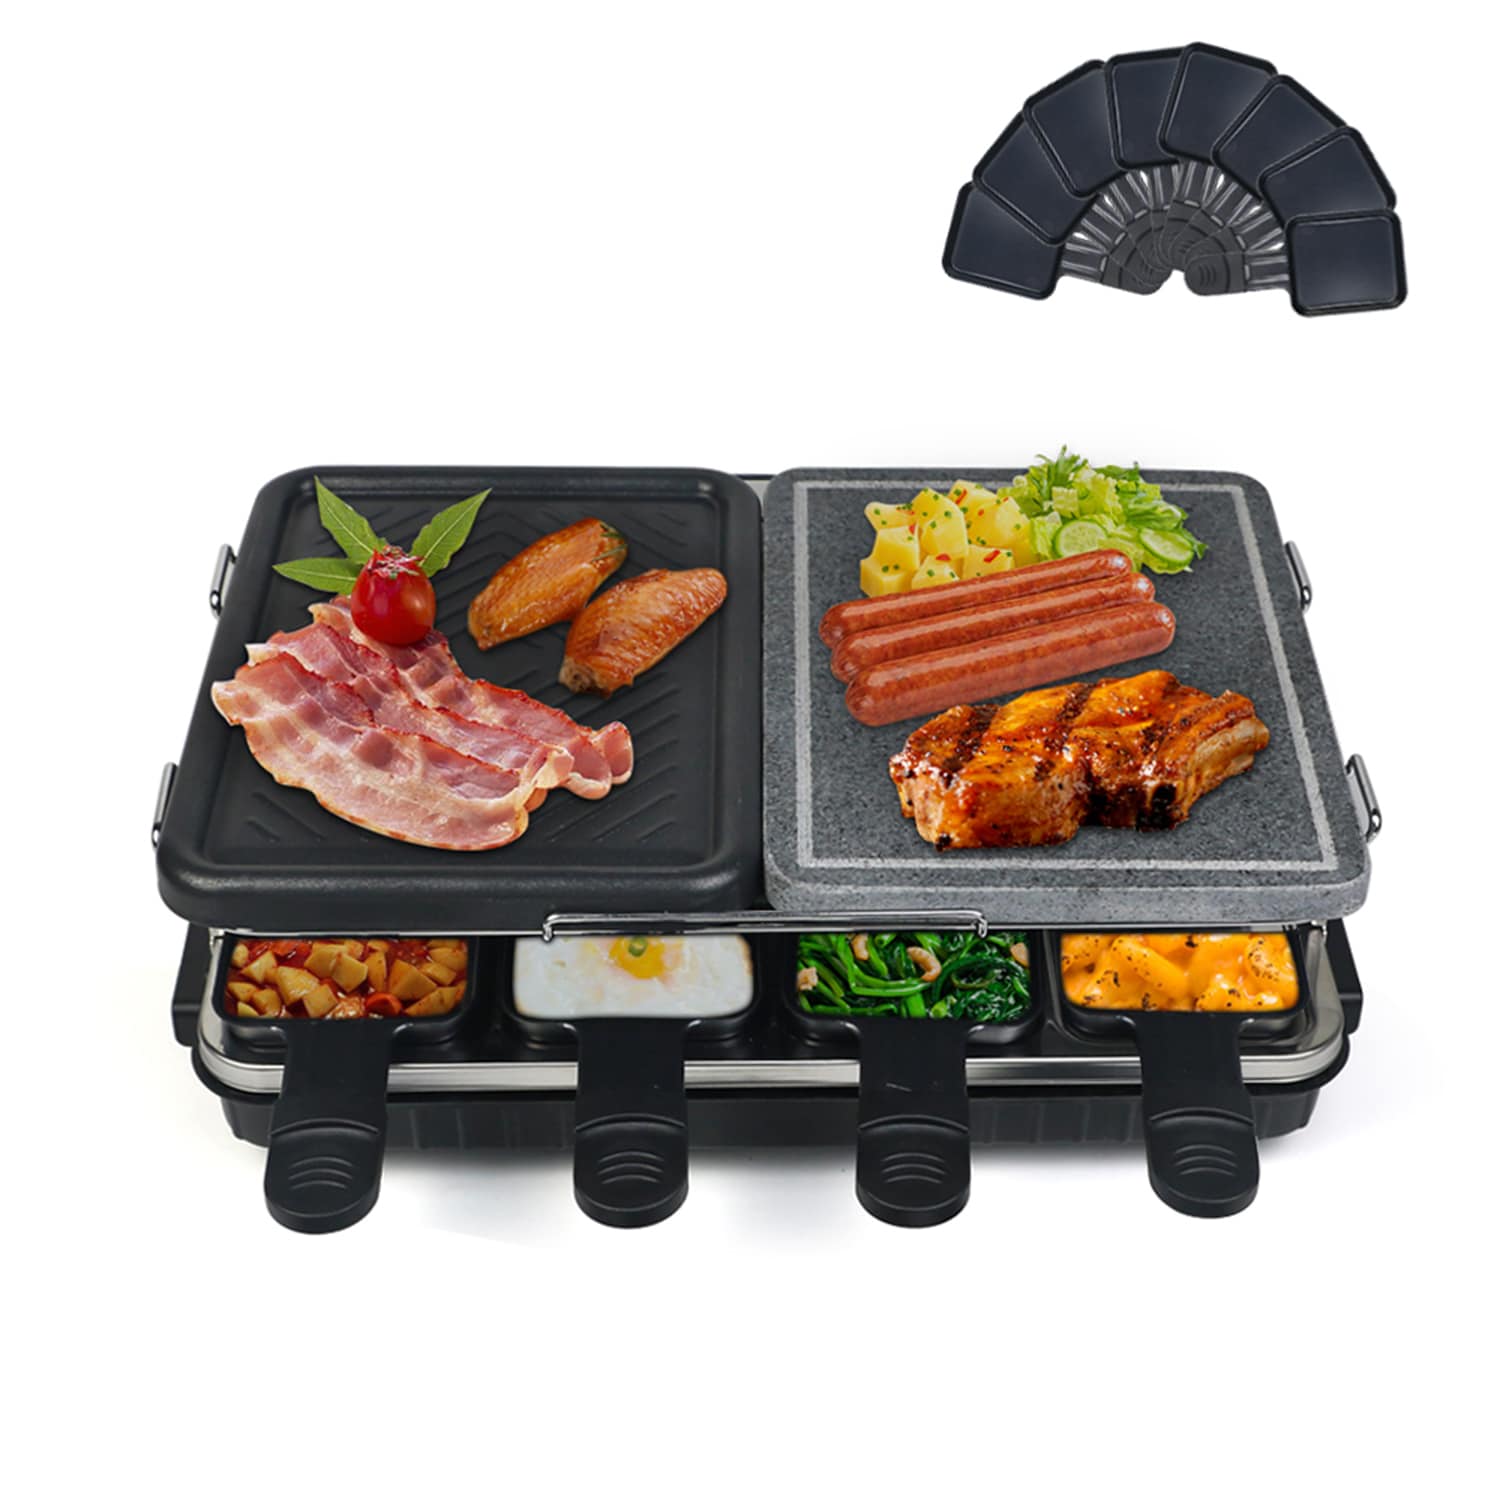 Barbecue Table for Grill department Non-Stick - 16.1-IN 1300W Multi-Purpose Grill Top at the Grill Plate Bybafun Cooking Electric with Electric and in Grills BBQ Korean Stone